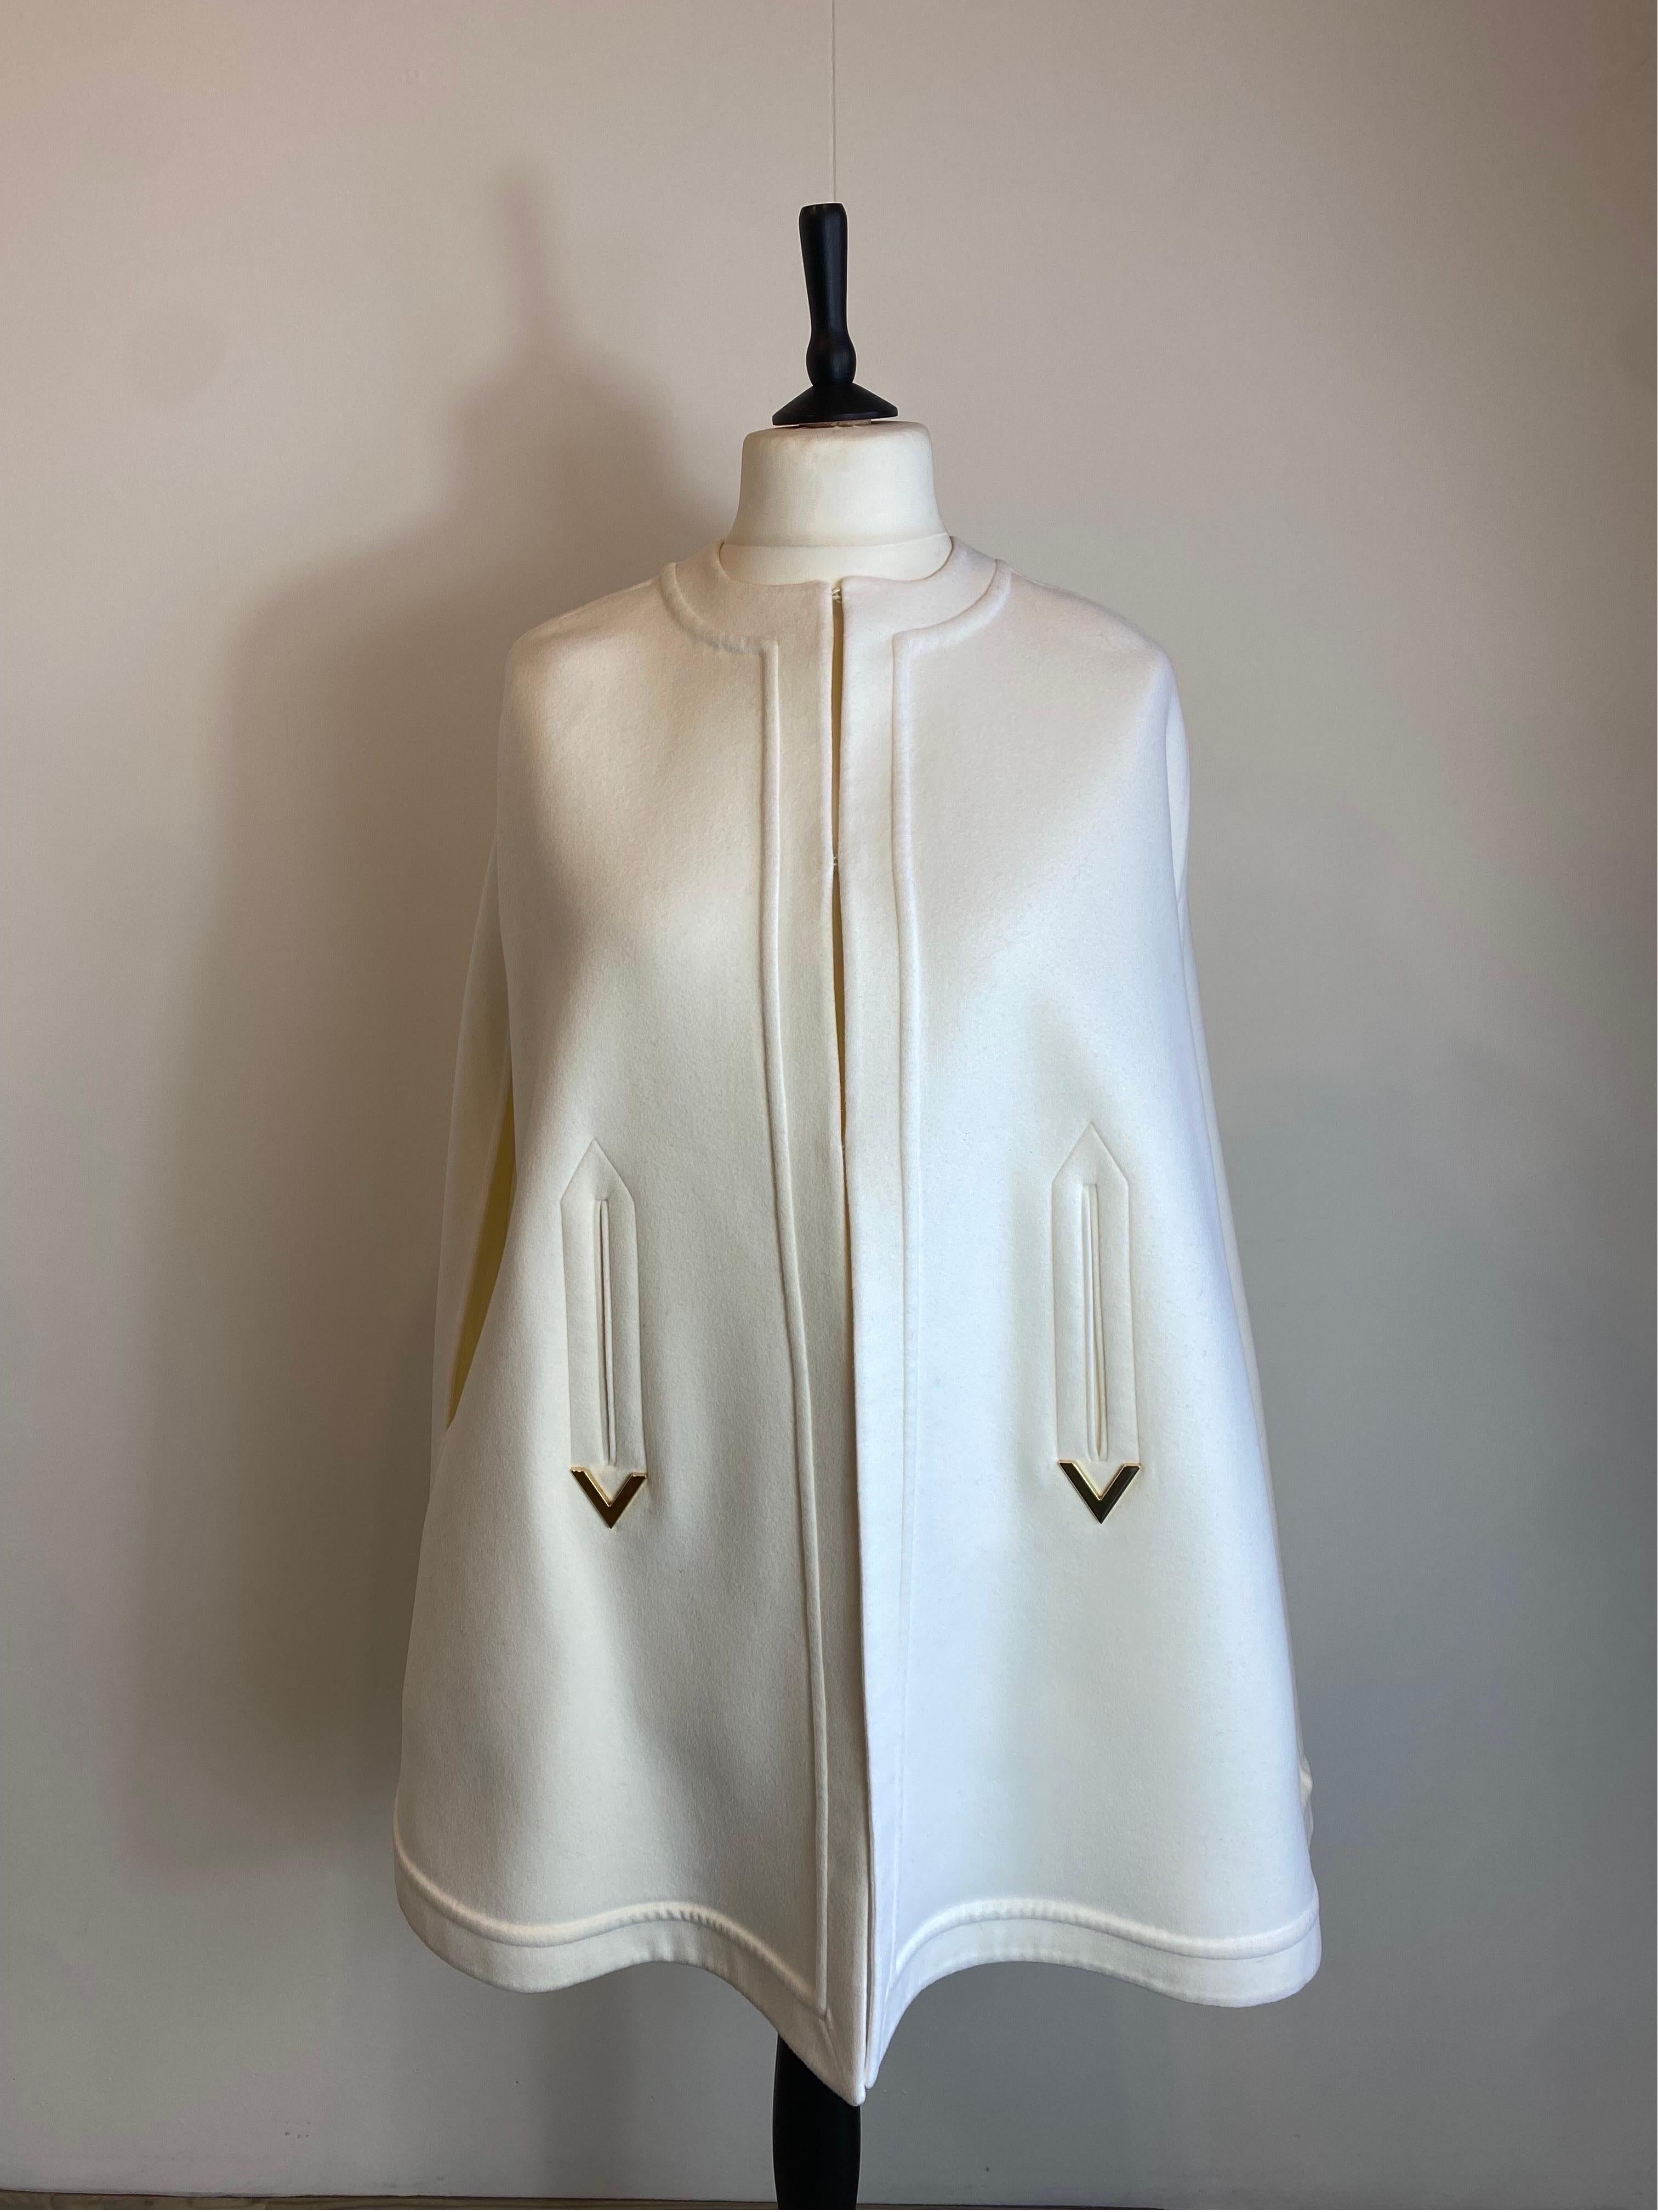 Valentino cape.
In virgin wool and cashmere.
Lined inside the pockets.
Golden V detail.
Italian size 38
Shoulders 38 cm
Length 85 cm
Excellent general condition, shows signs of normal use